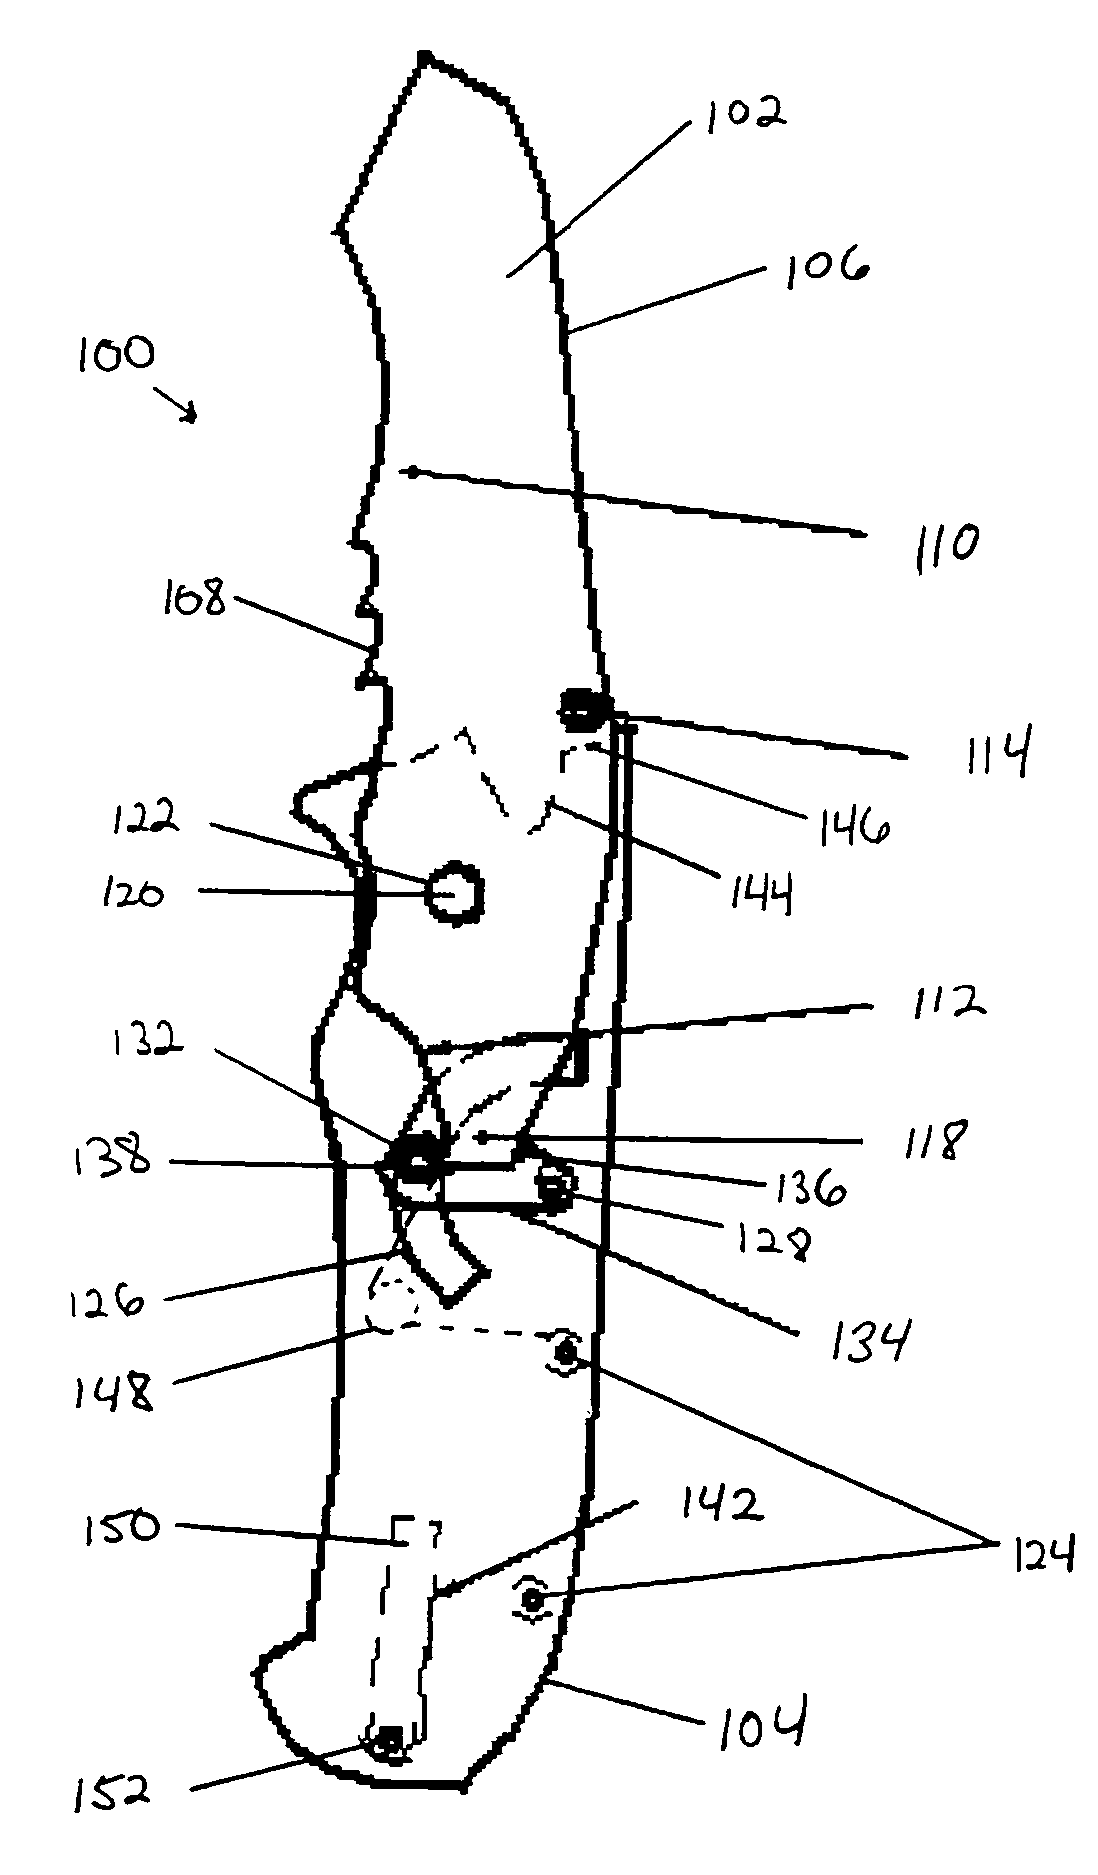 Folding knife having locking portion, clip portion and unsharpened protrusion